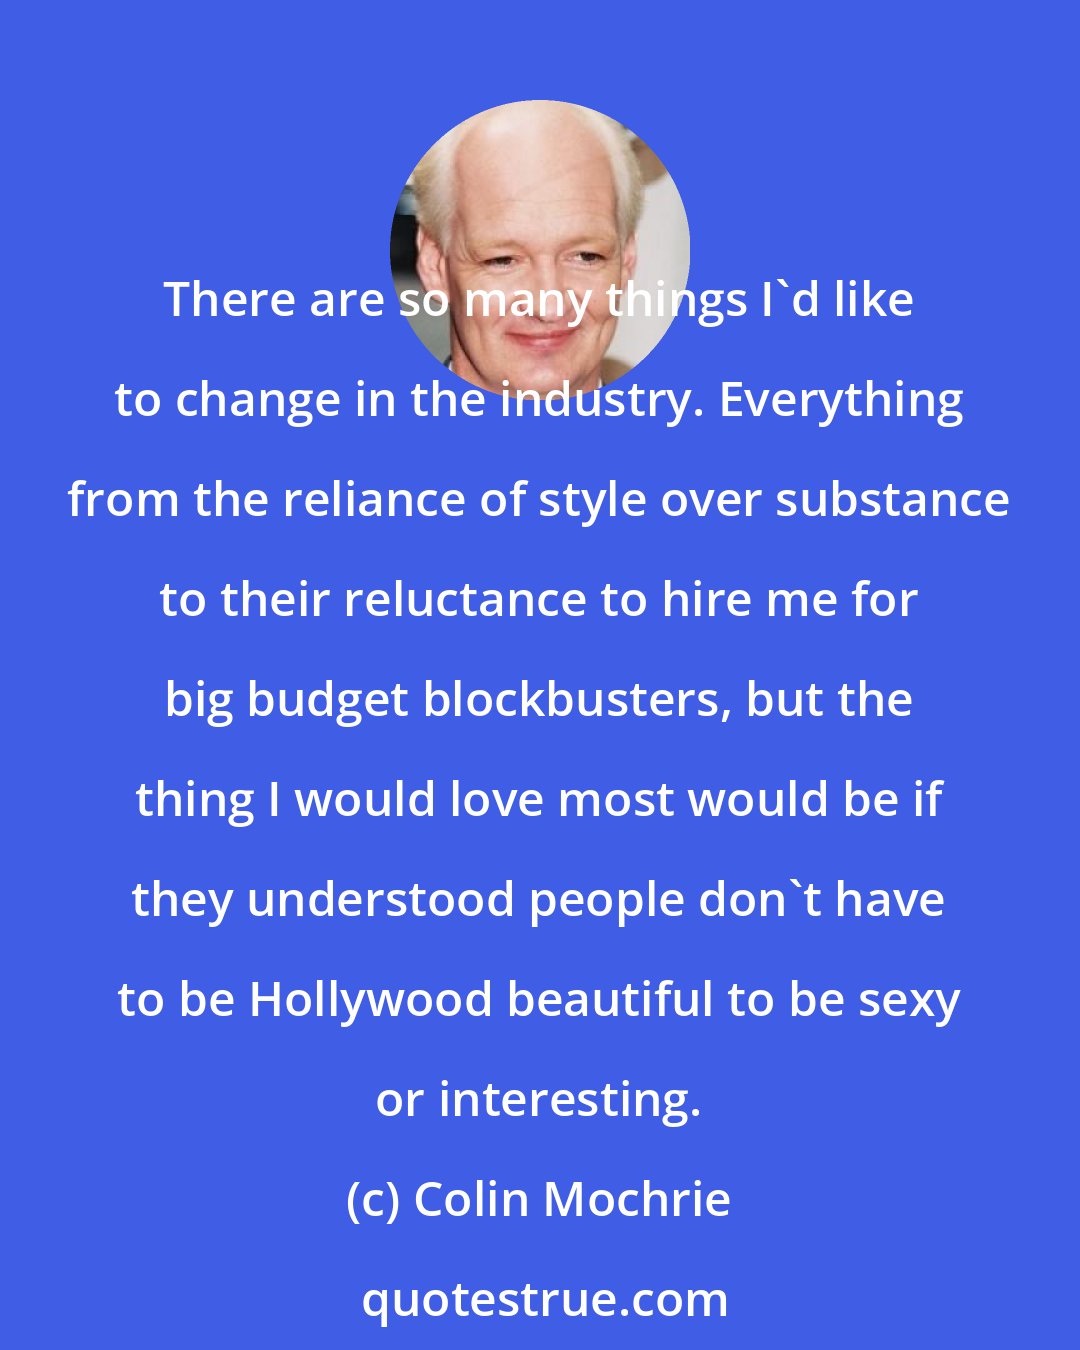 Colin Mochrie: There are so many things I'd like to change in the industry. Everything from the reliance of style over substance to their reluctance to hire me for big budget blockbusters, but the thing I would love most would be if they understood people don't have to be Hollywood beautiful to be sexy or interesting.